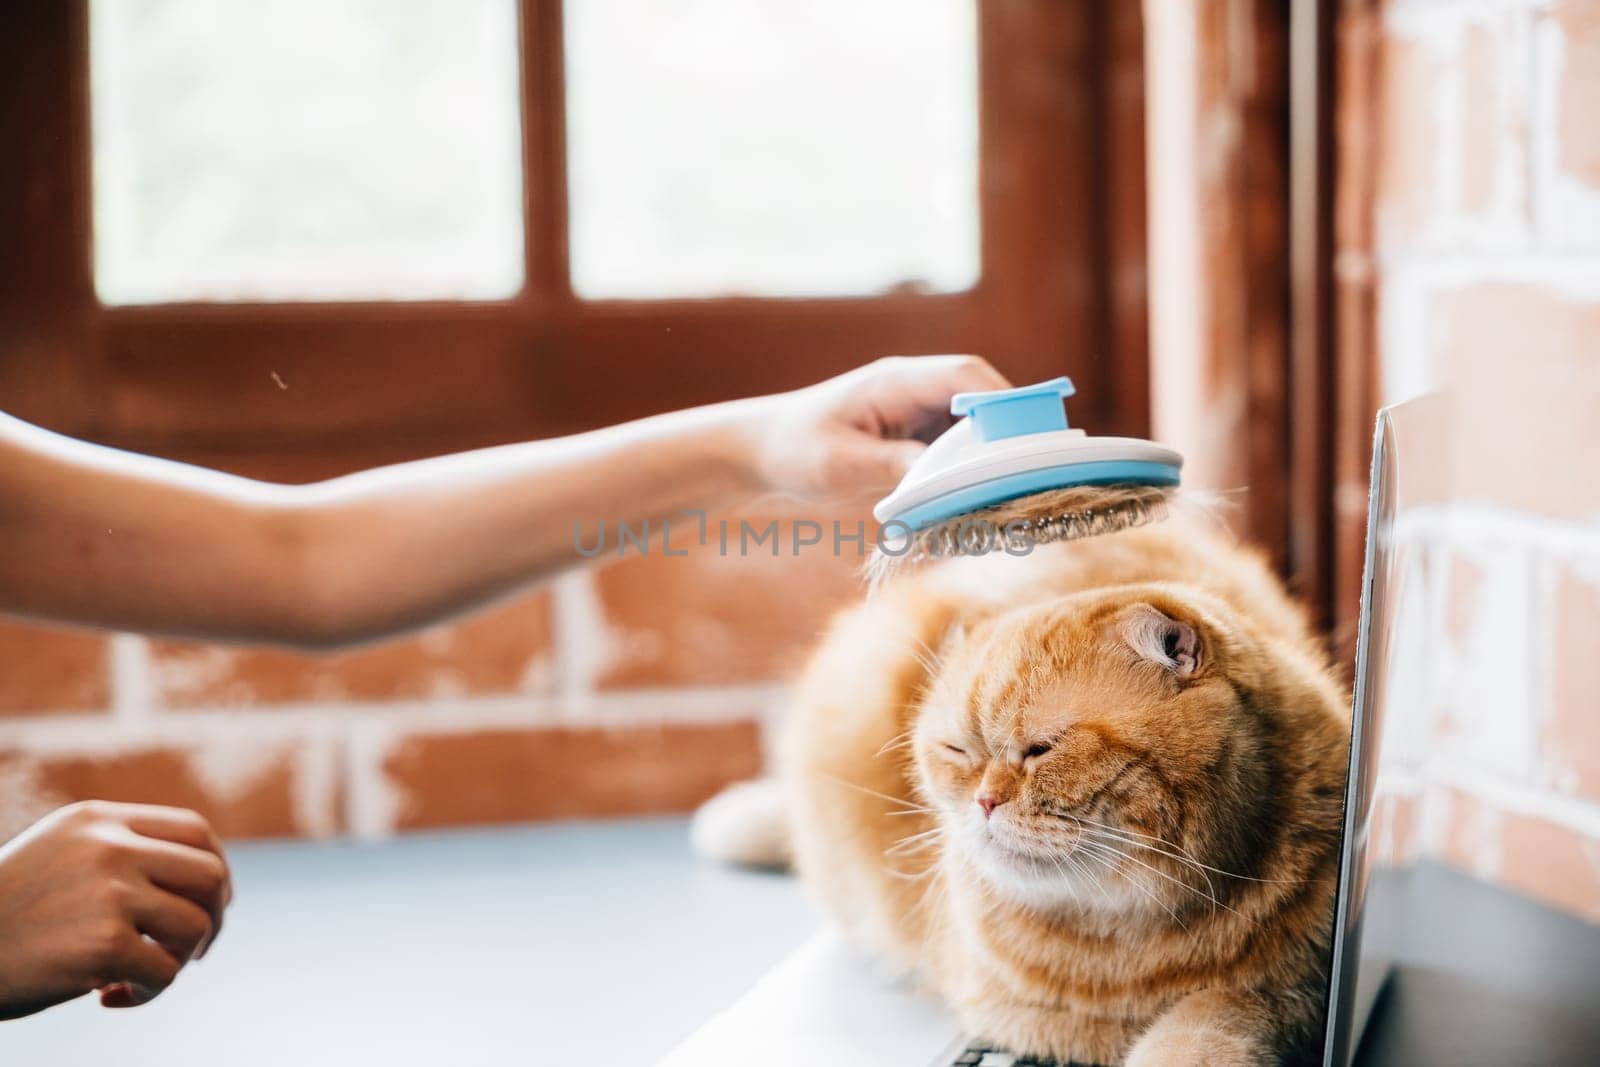 Owner's care, A woman enjoys grooming her Scottish Fold cat, who dreams peacefully during the grooming session. Their bond is evident in this relaxed and enjoyable scene. Pat love routine